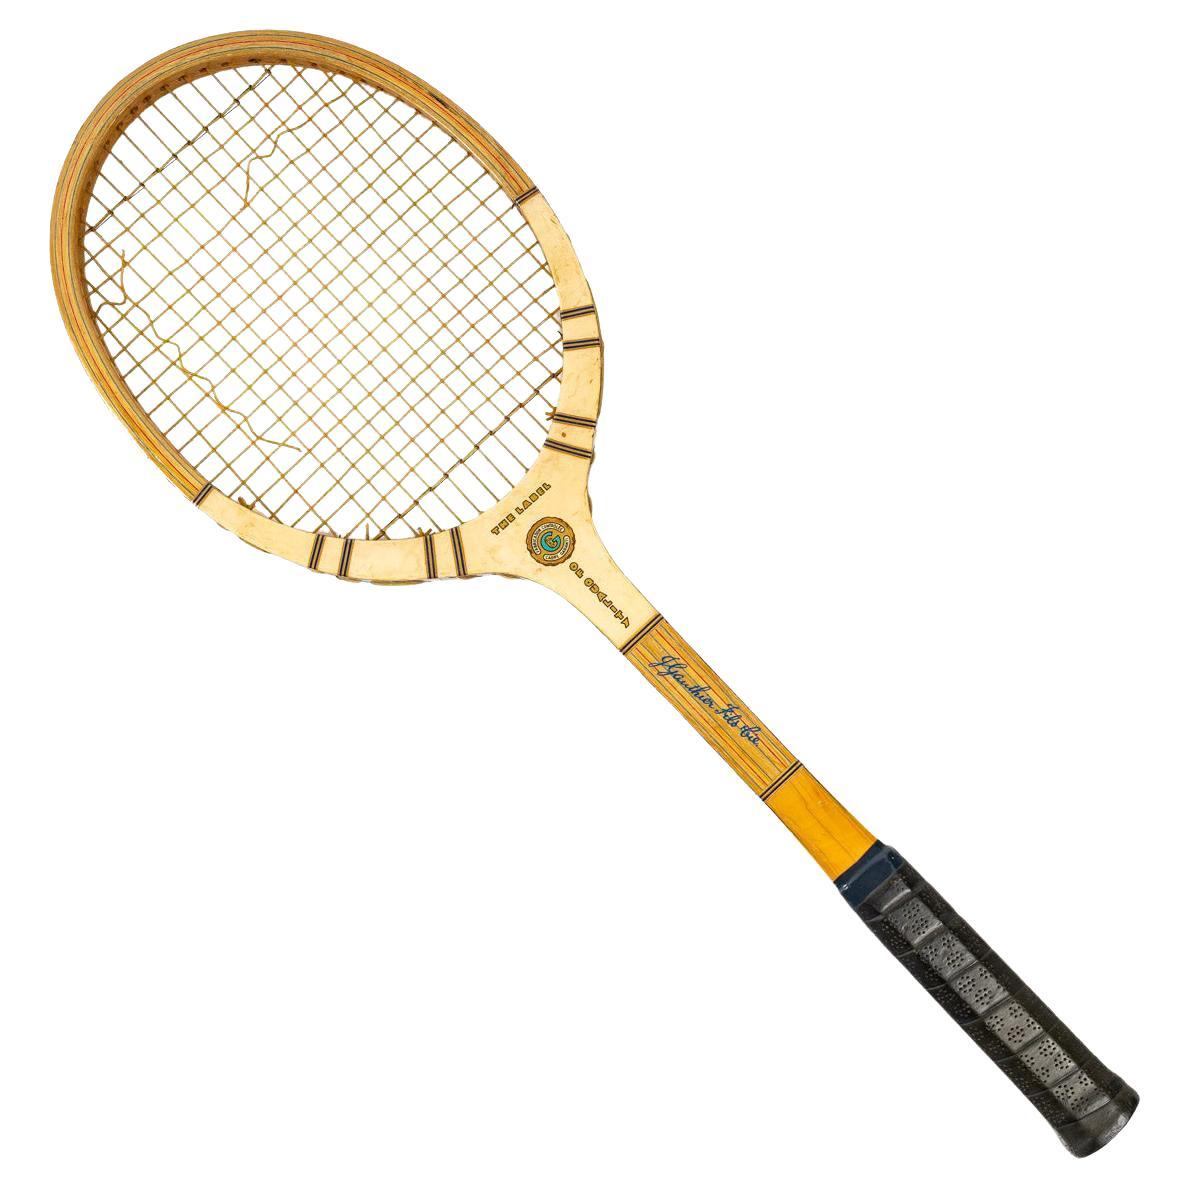 Atlas Tennis Racket, for Championship Play For Sale